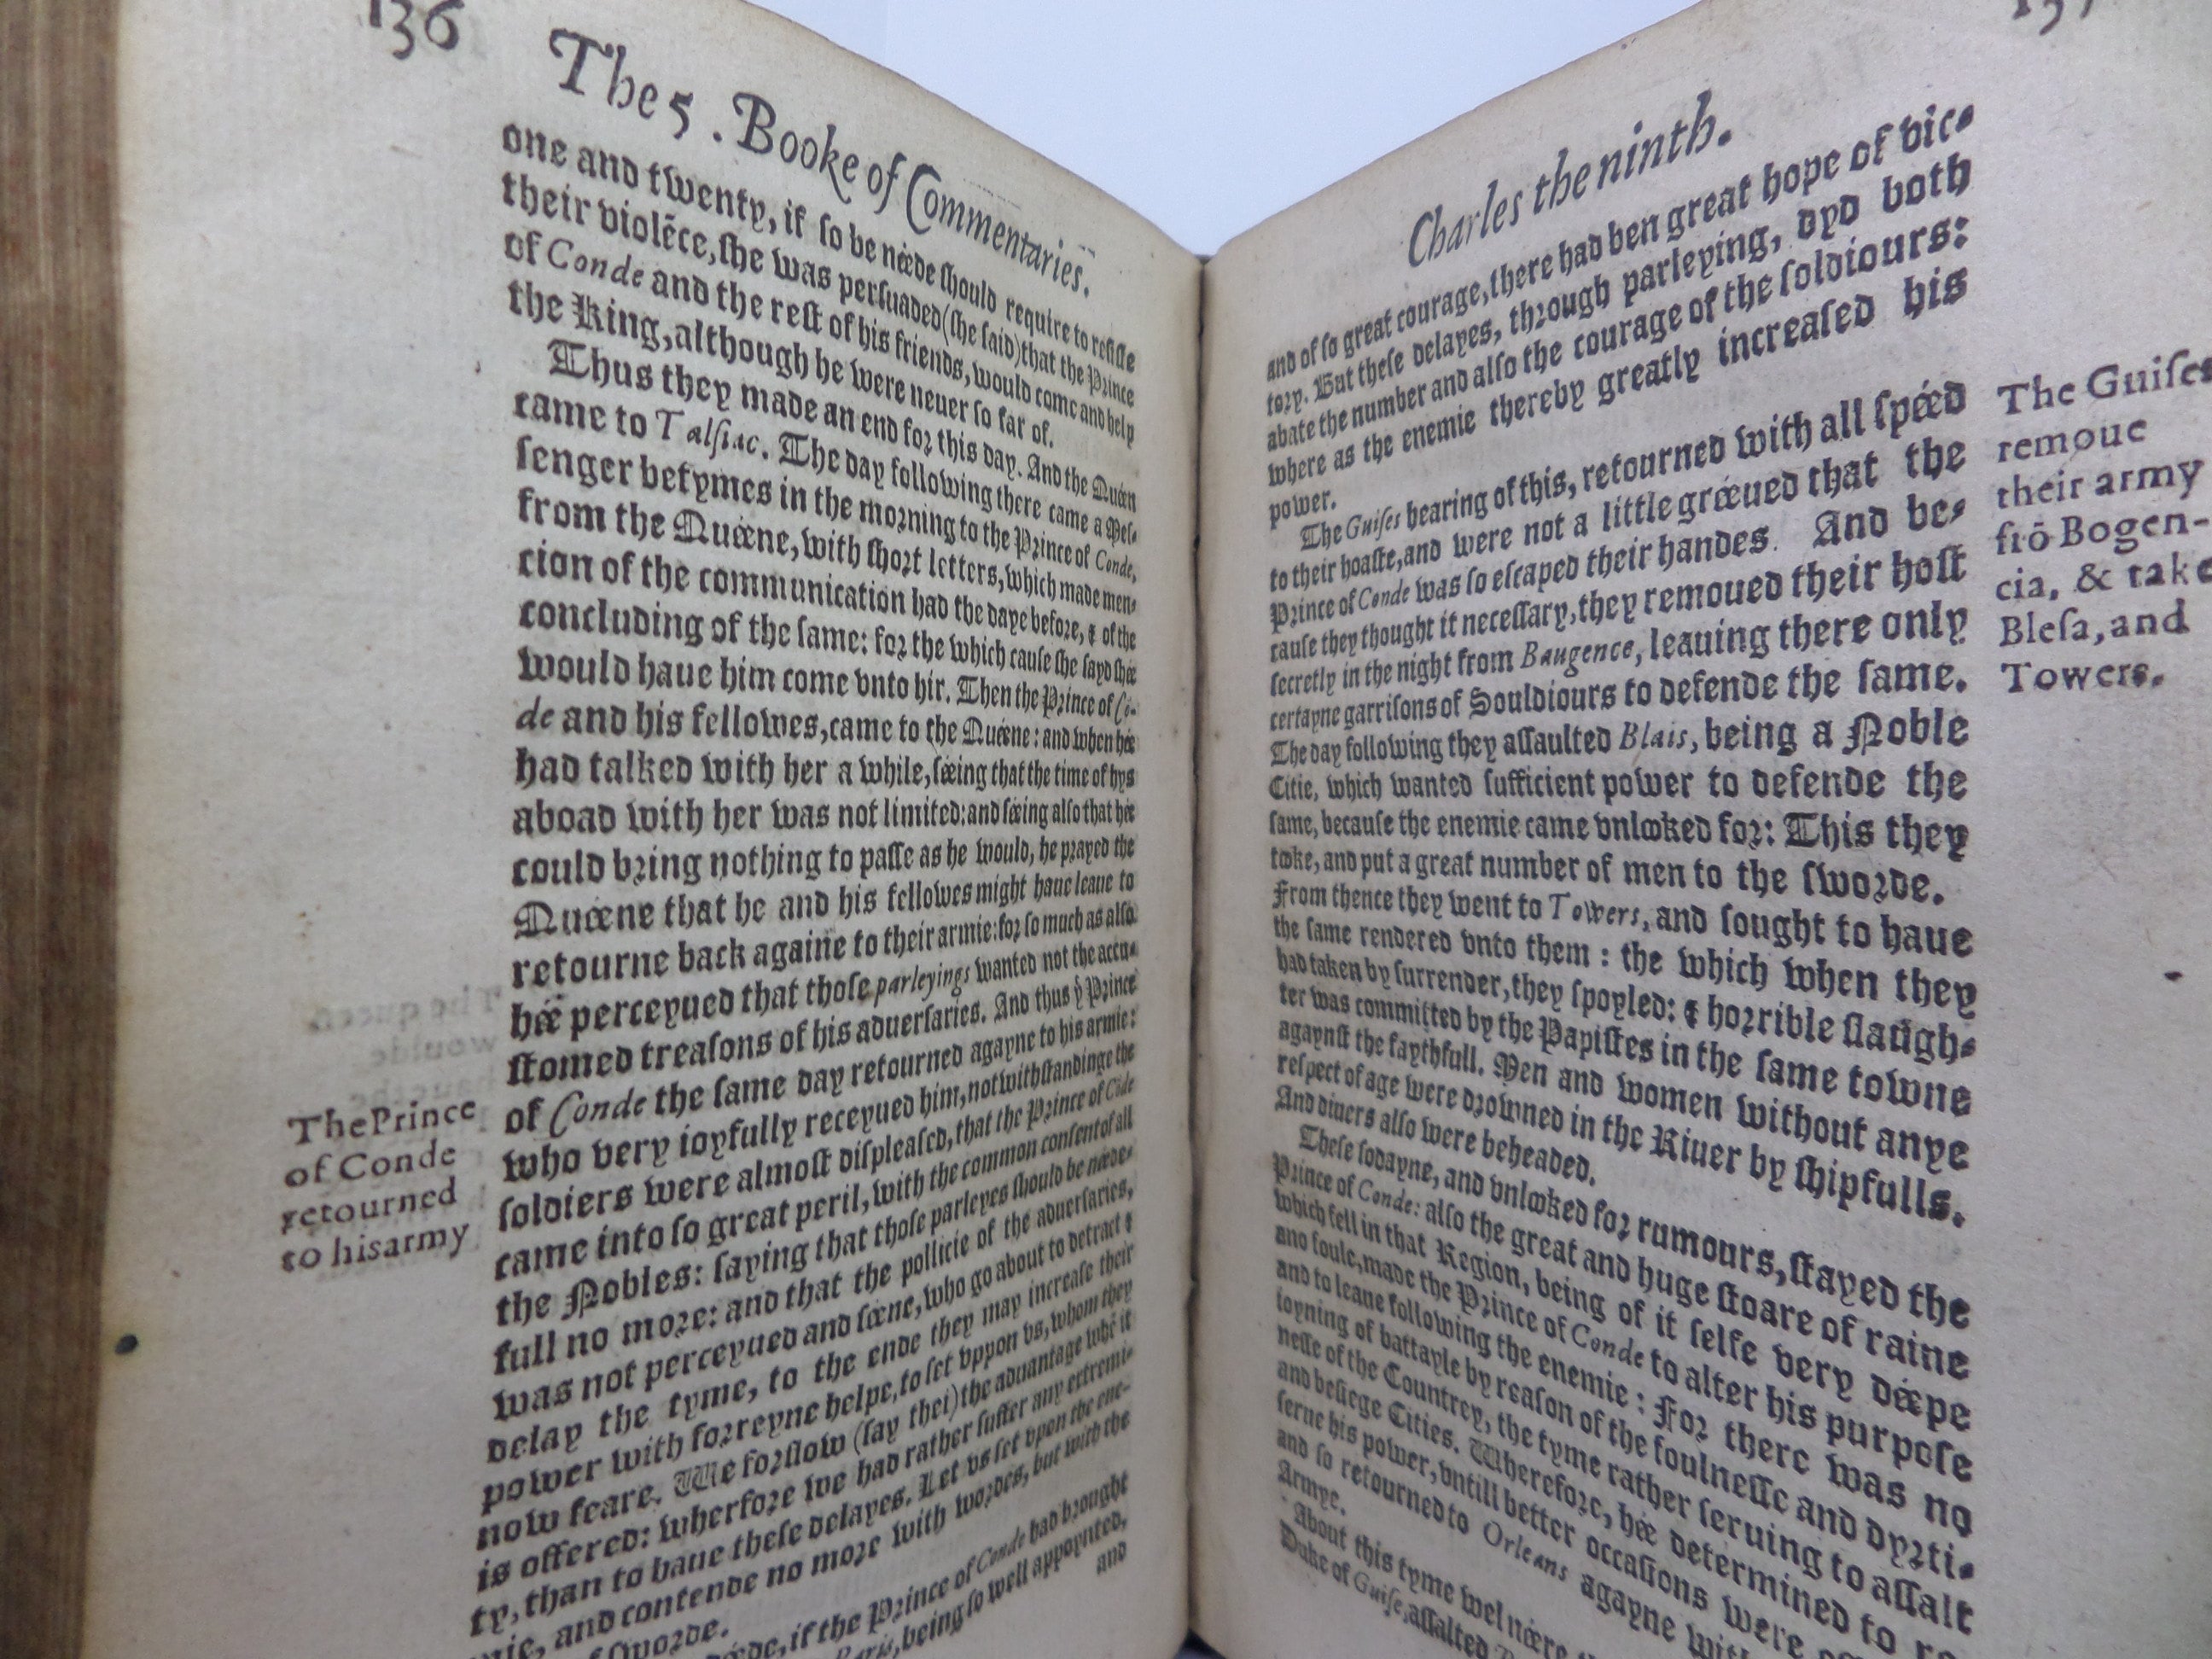 COMMENTARIES ON THE CIVIL WARS OF FRANCE BY JEAN DE SERRES 1574 ENGLISH TRANSLATION